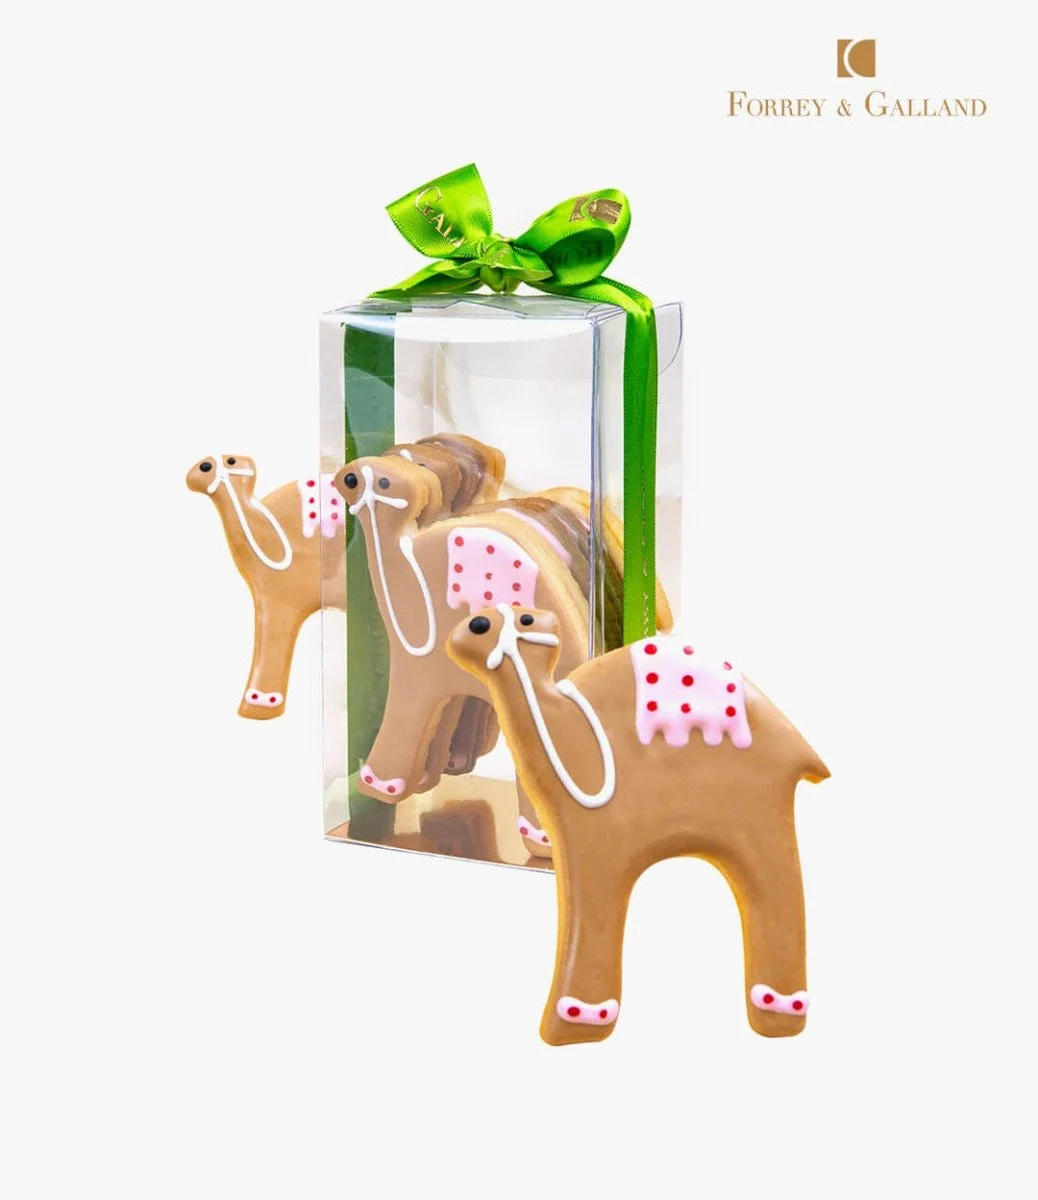 Camel Cookies 6 pcs by Forrey & Galland